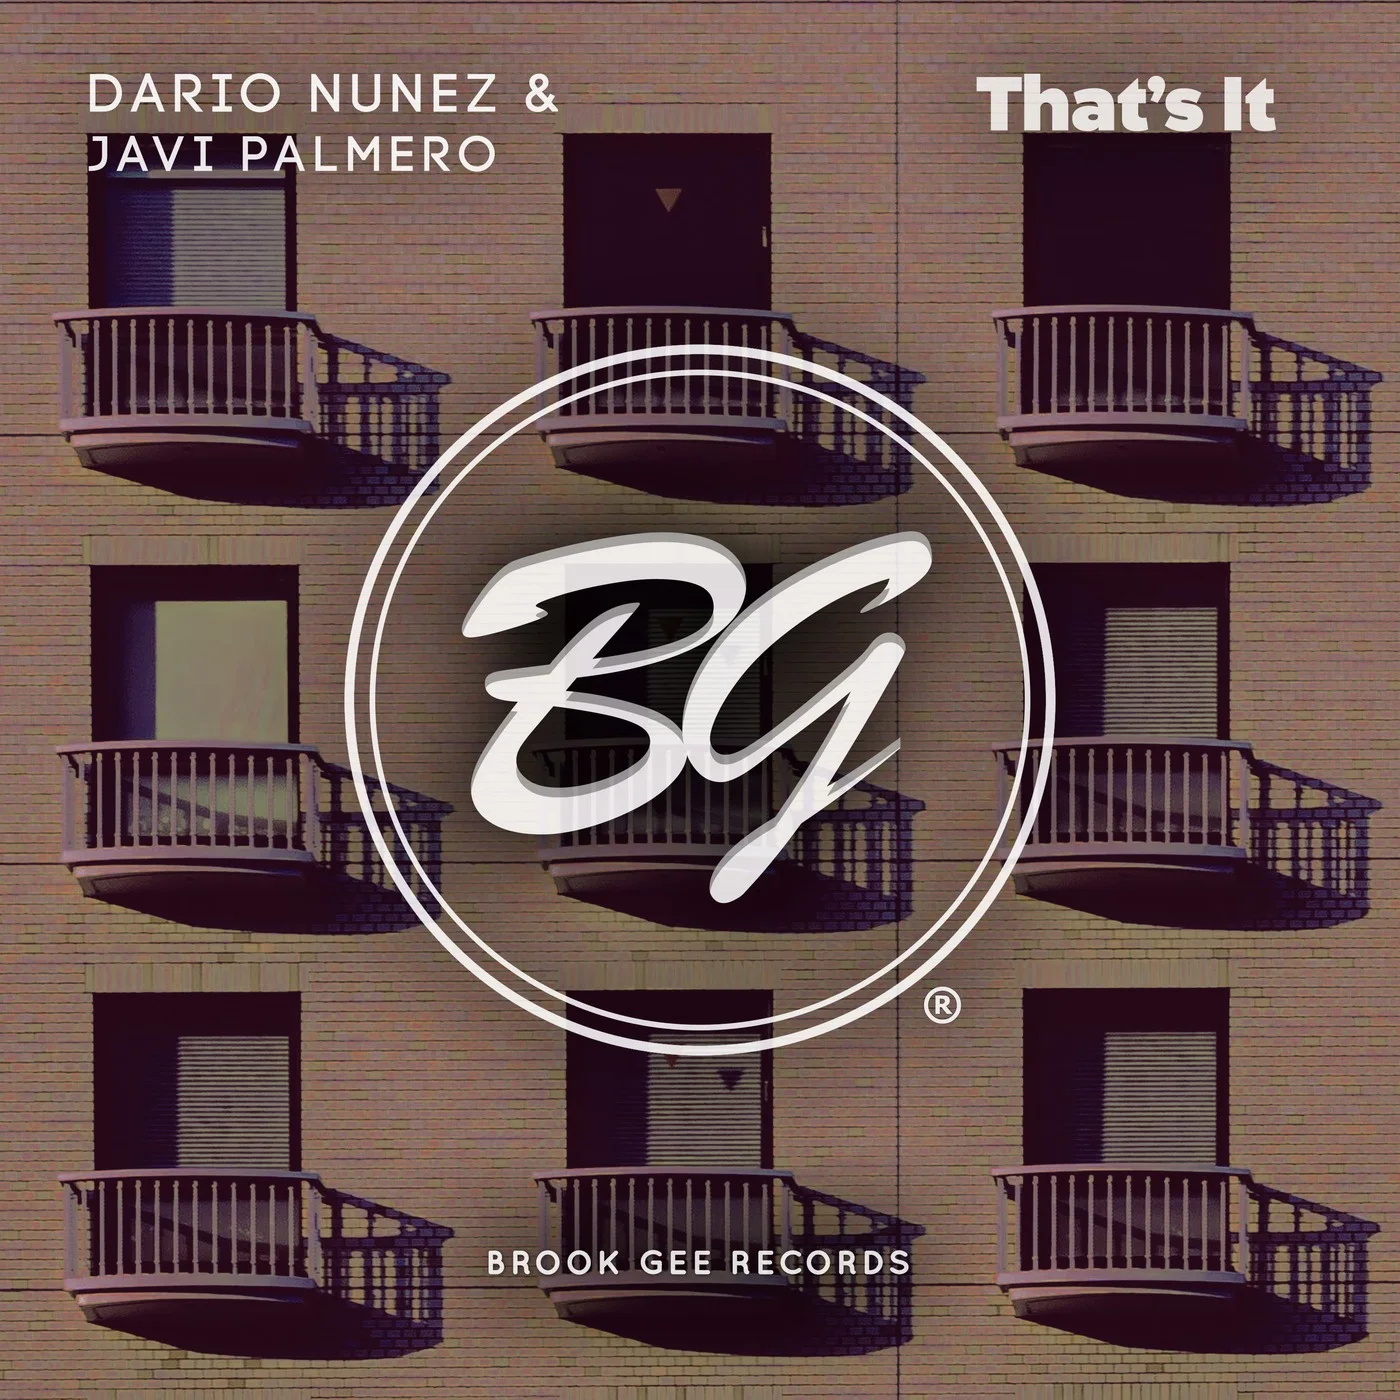 Get ready to move your body to the infectious beats of "That's It" by Dario Nunez & Javi Palmero